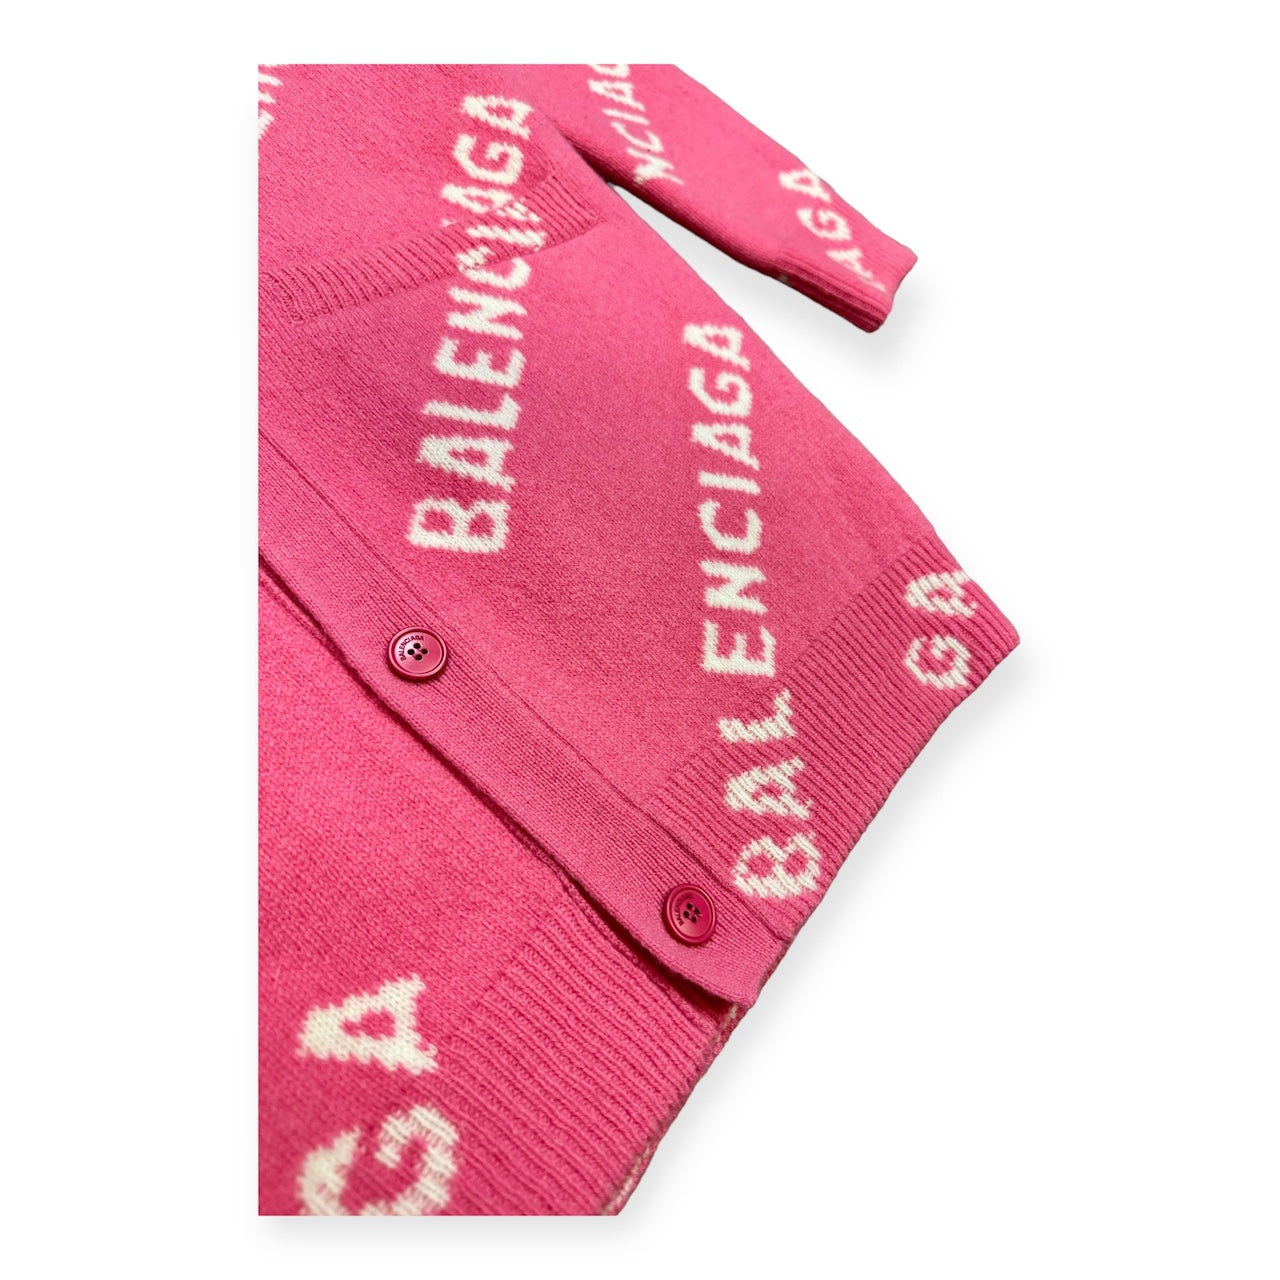 BALENCIAGA All Over Logo Cardigan in Pink | Size XS